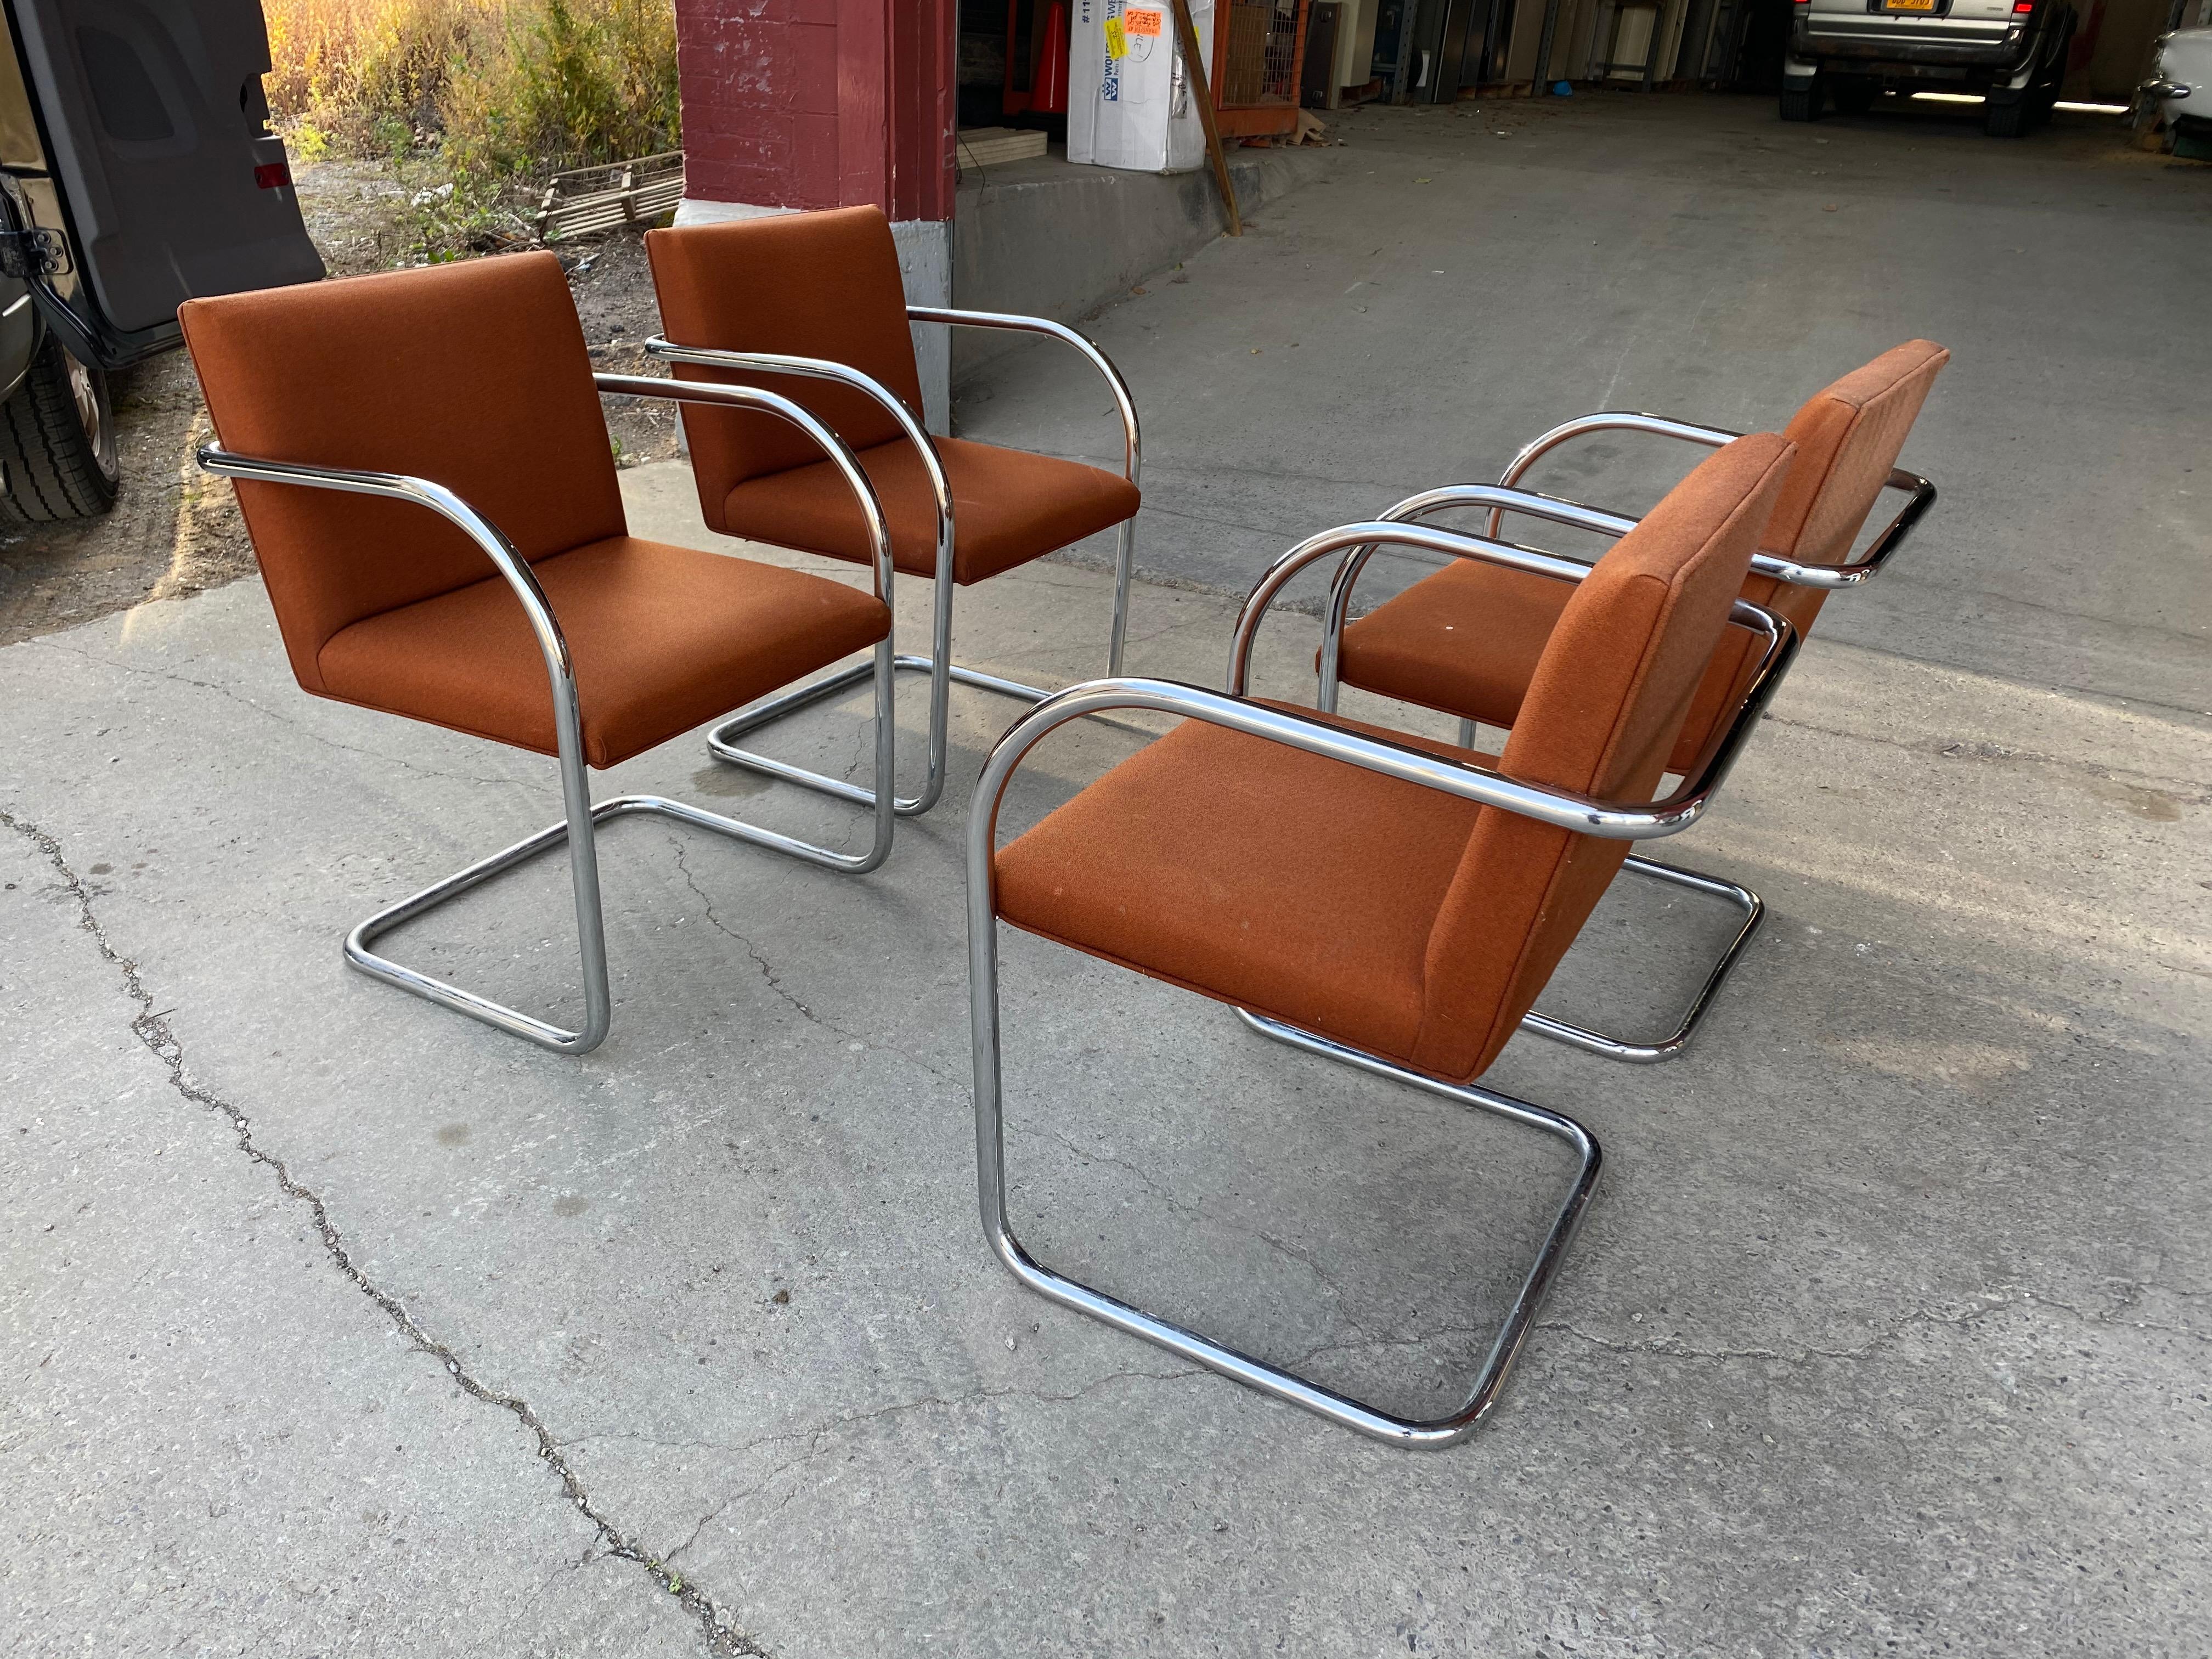 Classic set of 4 midcentury Brno chairs by Mies van der Rohe for Gordon International, beautiful polished chrome tubular steel, retain original orange wool fabric, minor blemishes and sun fading to backs.